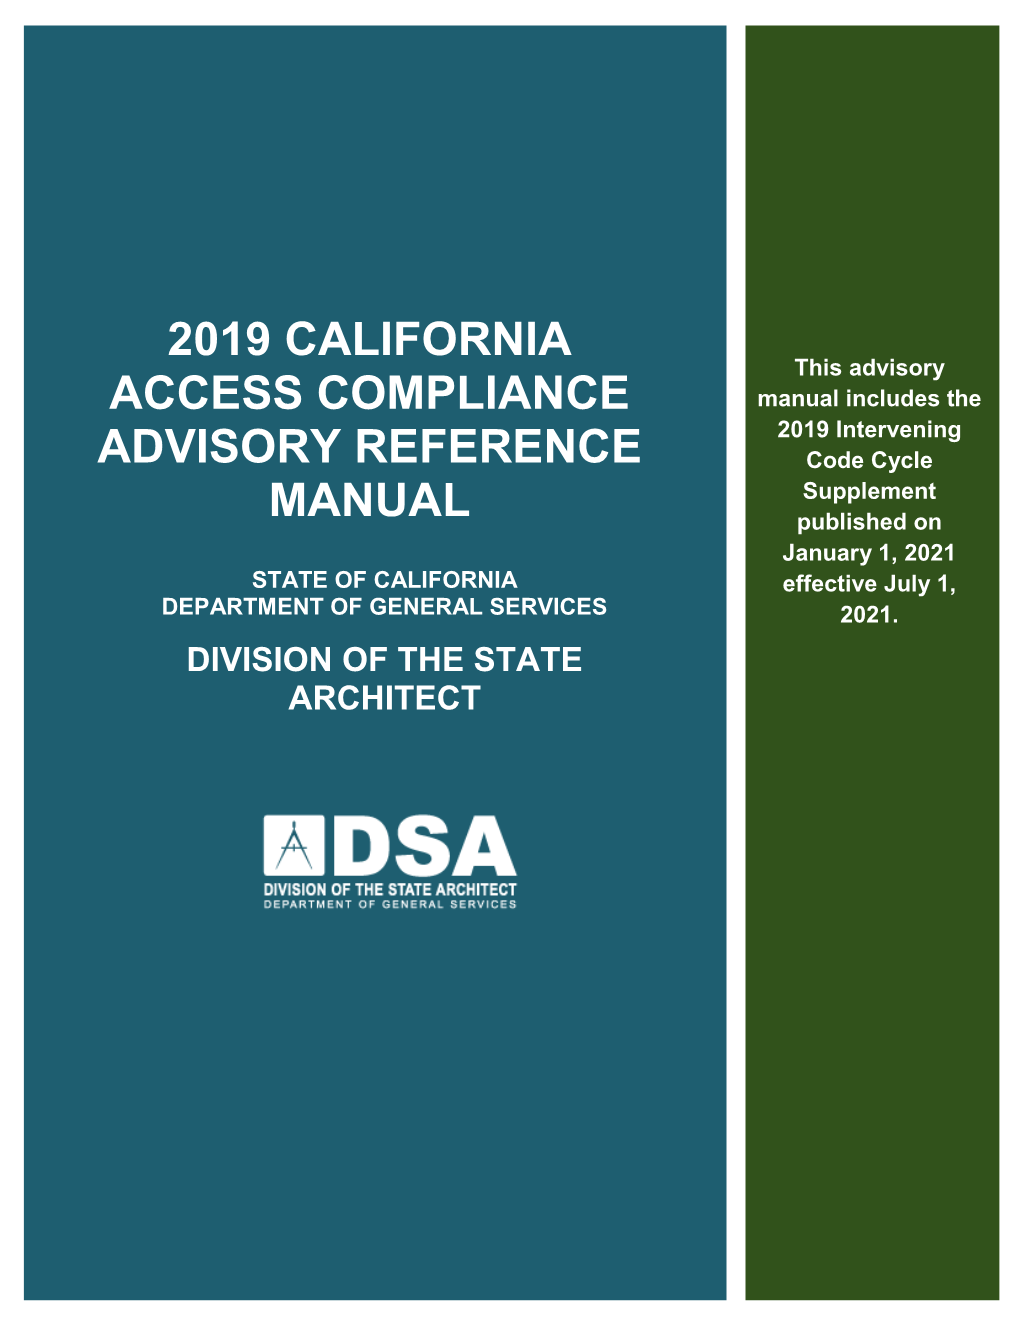 2019 California Access Compliance Advisory Reference Manual Is Part of DSA’S Ongoing Effort to Promote Consistency in the Design and Construction of Projects